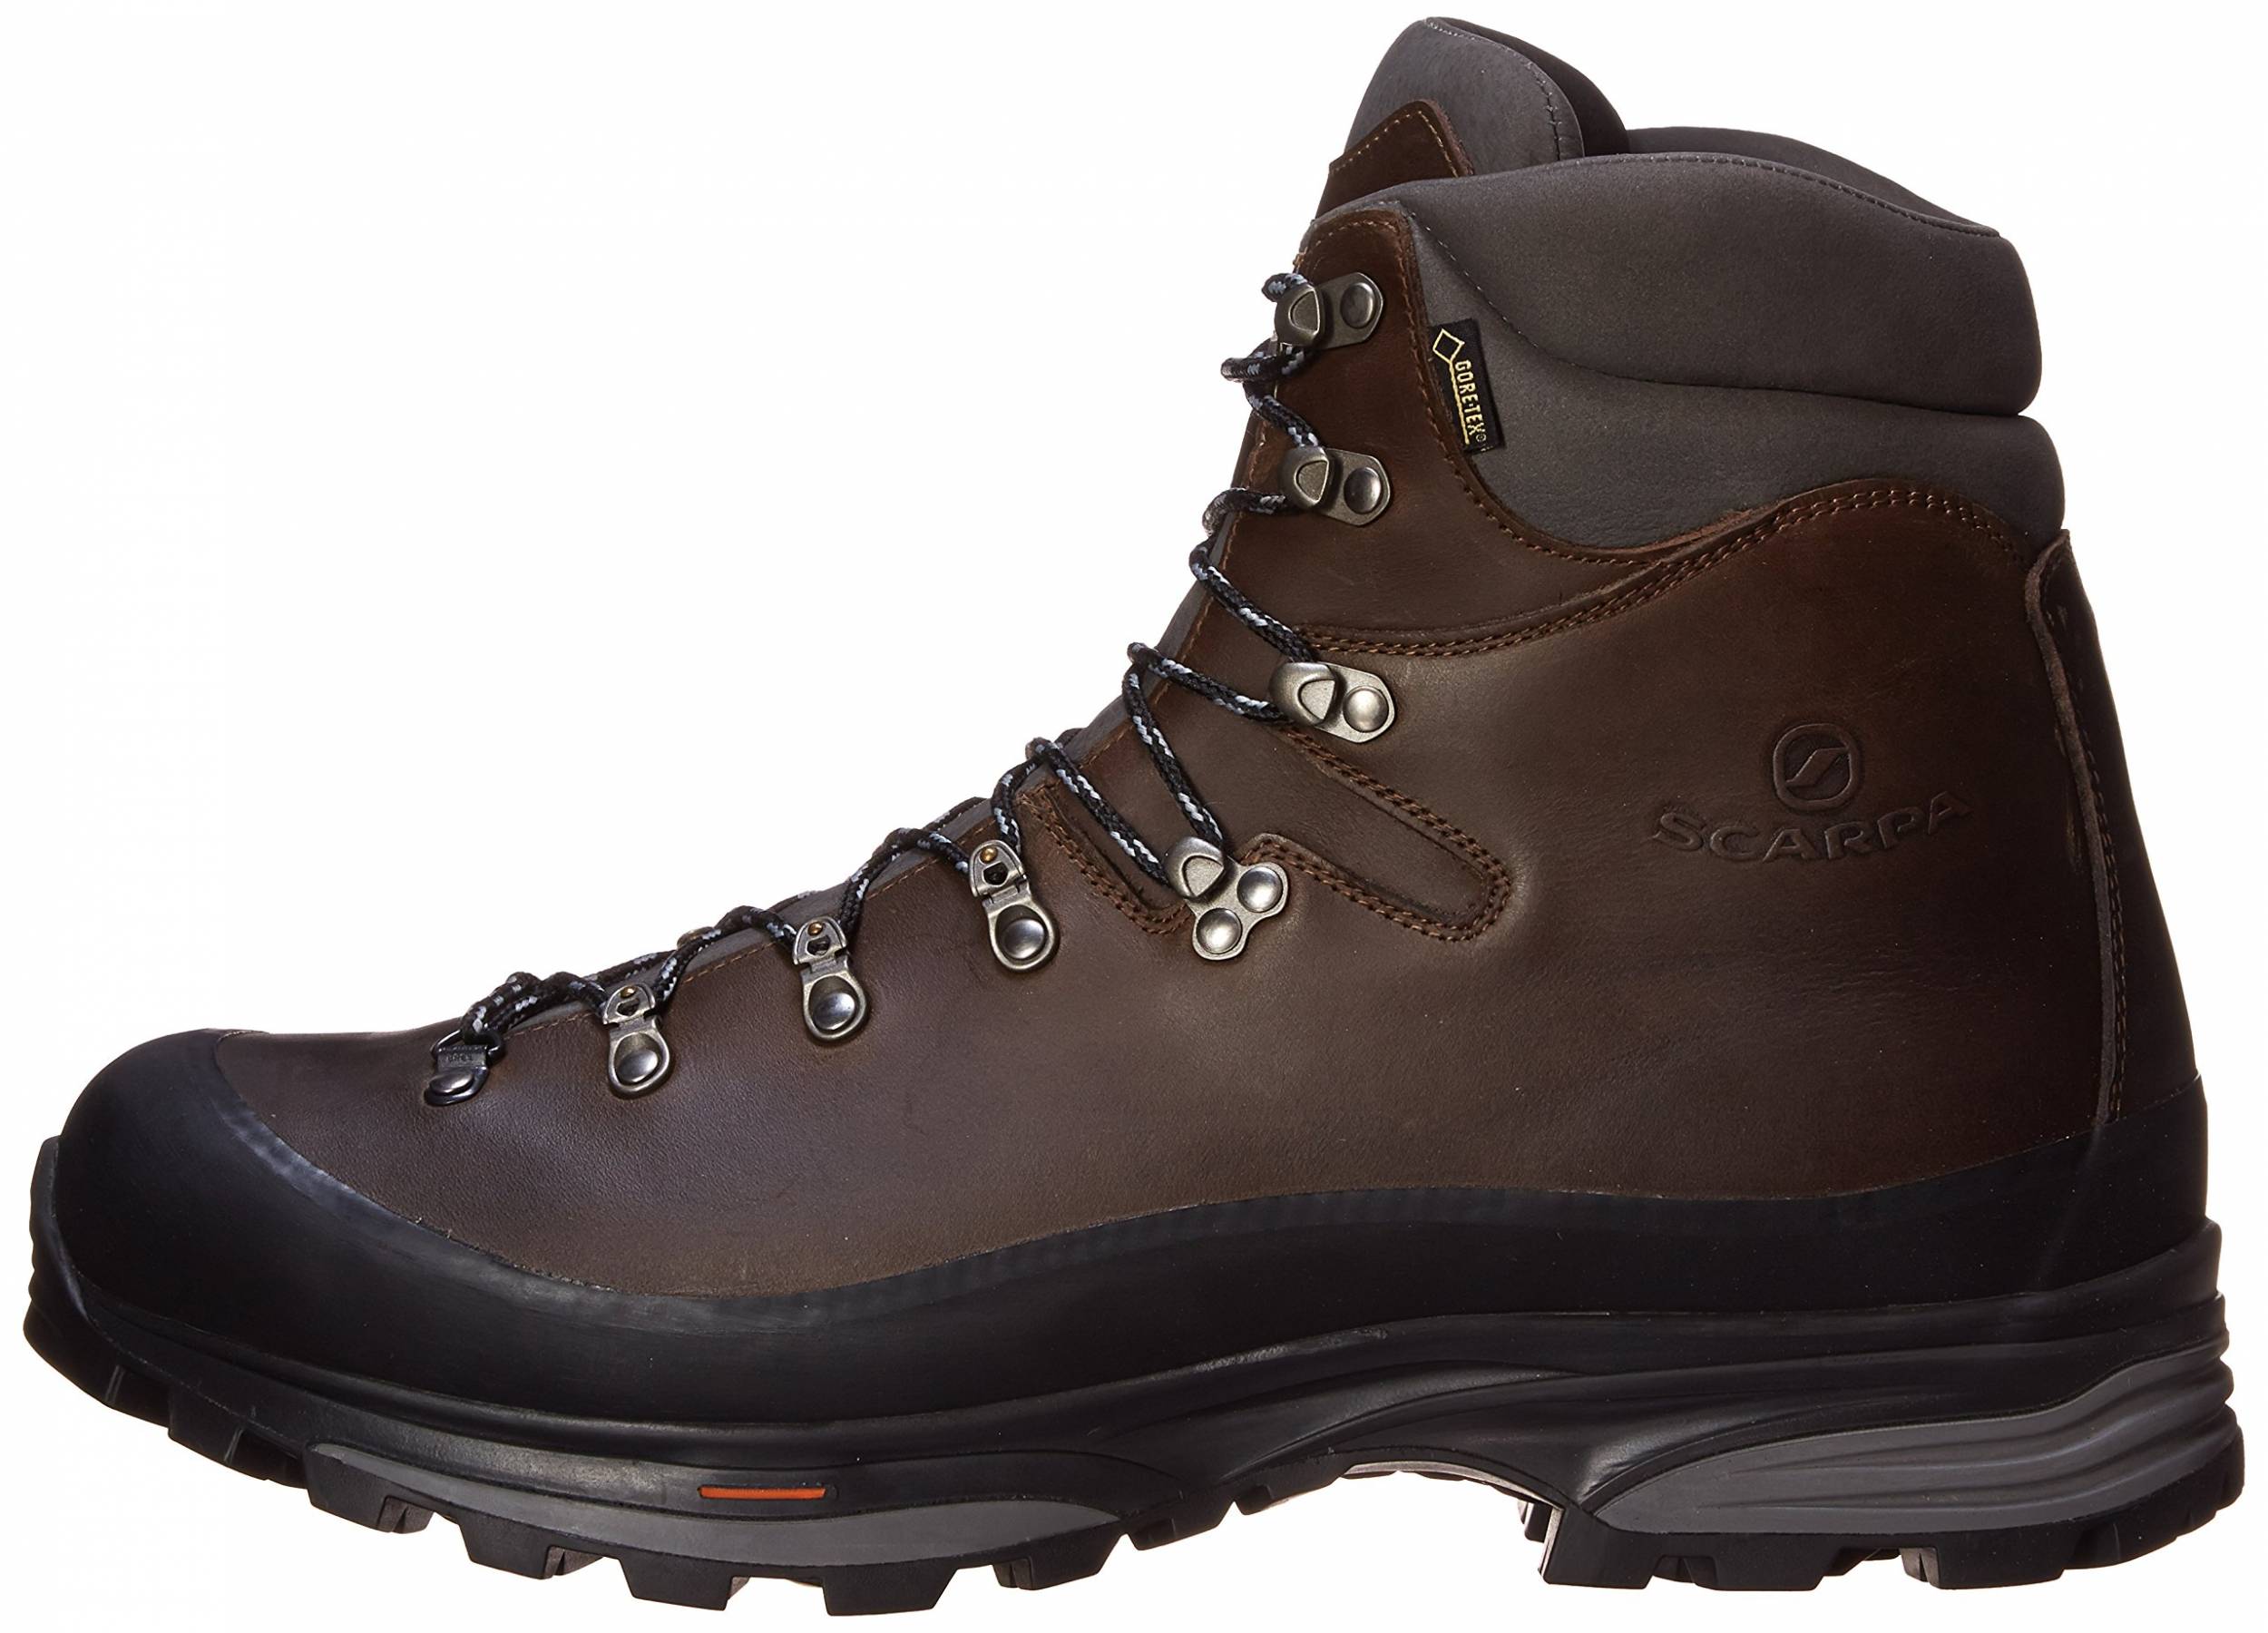 Save 32% on High Cut Hiking Boots (101 